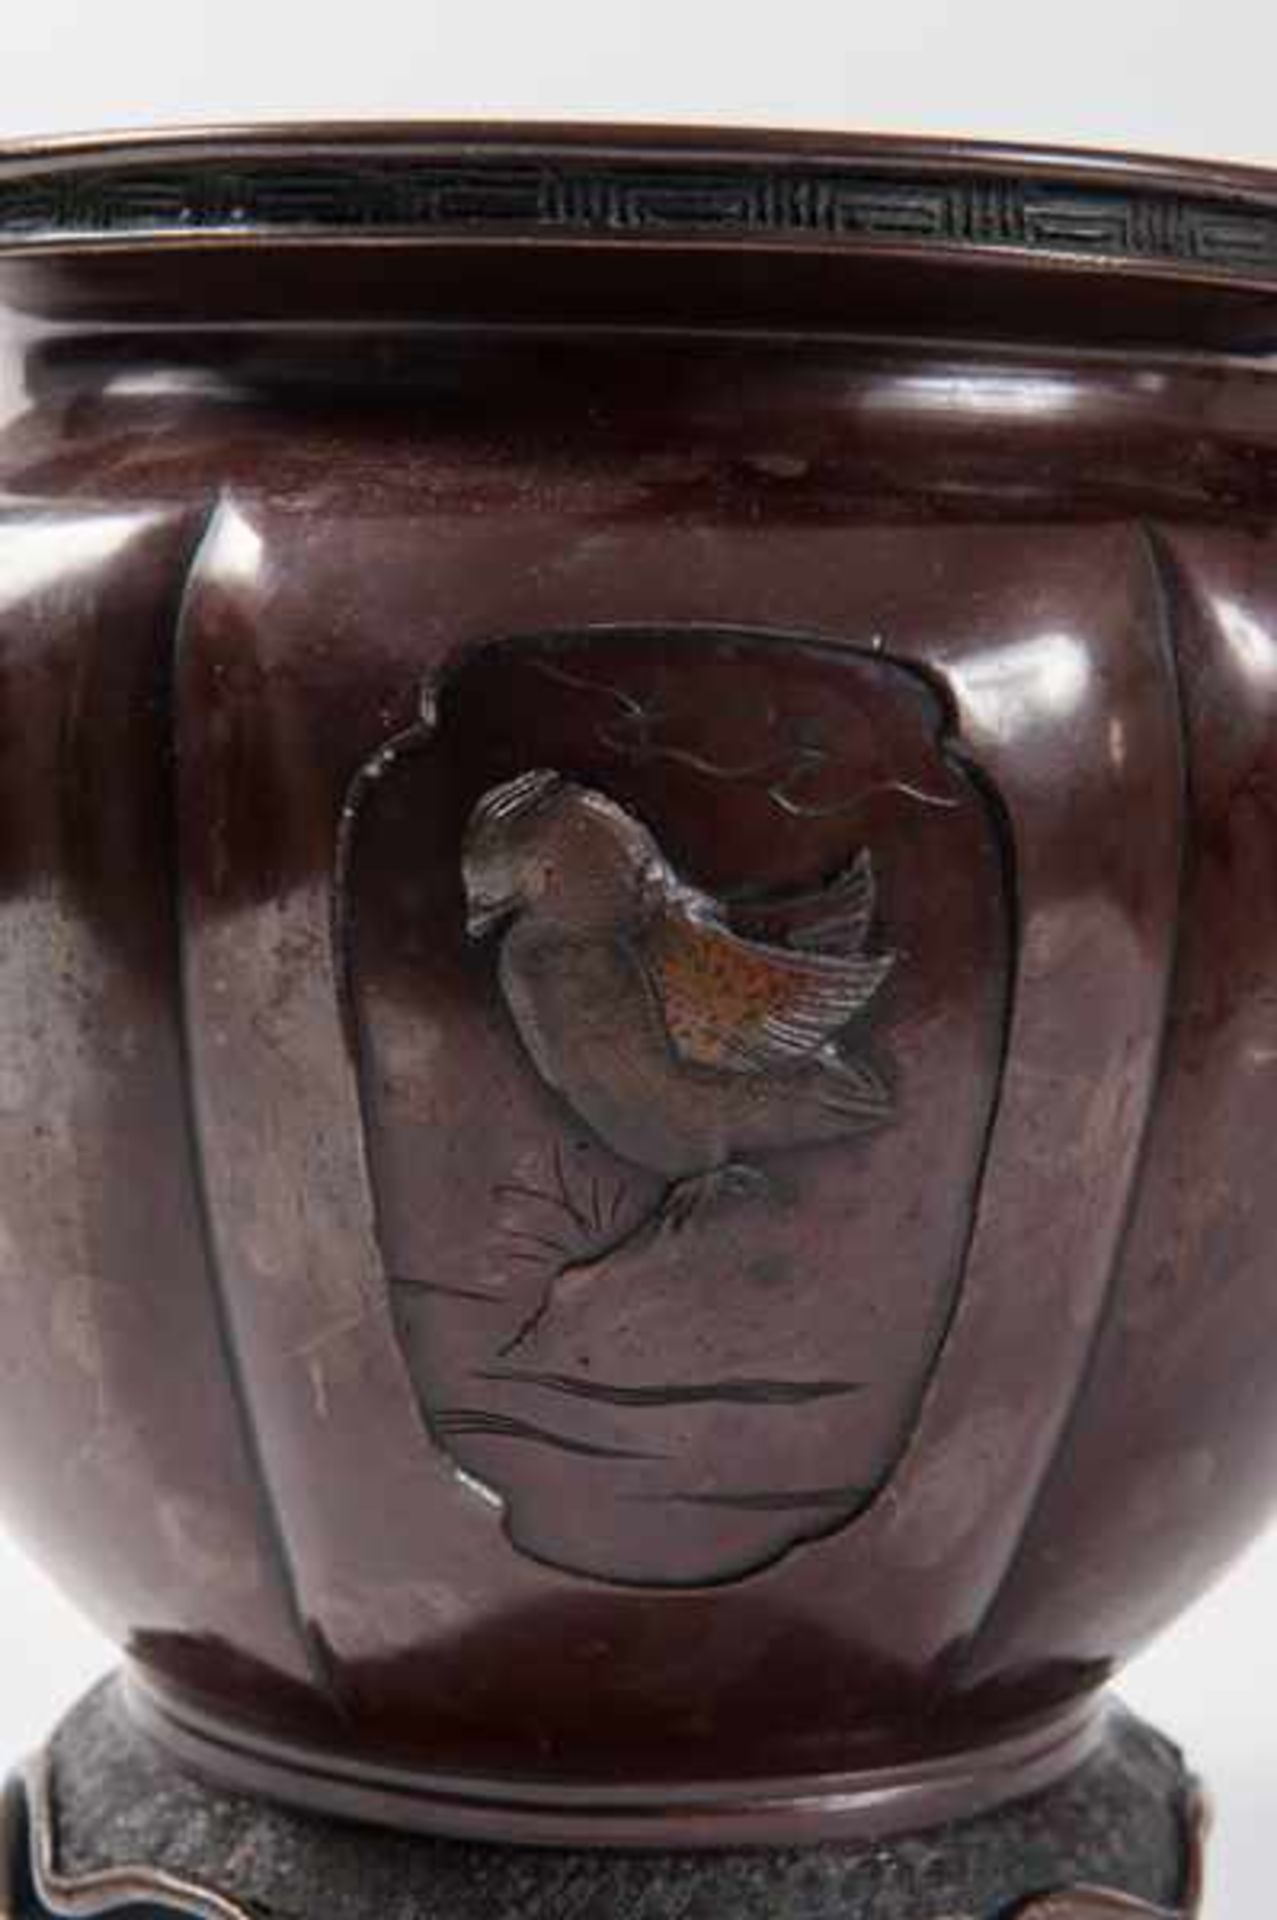 AN ATTRACTIVE BRONZE VESSEL DECORATED WITH CUTS AND INLAYS Bronze. Japan, 19th cent.Suitable as a - Image 4 of 4